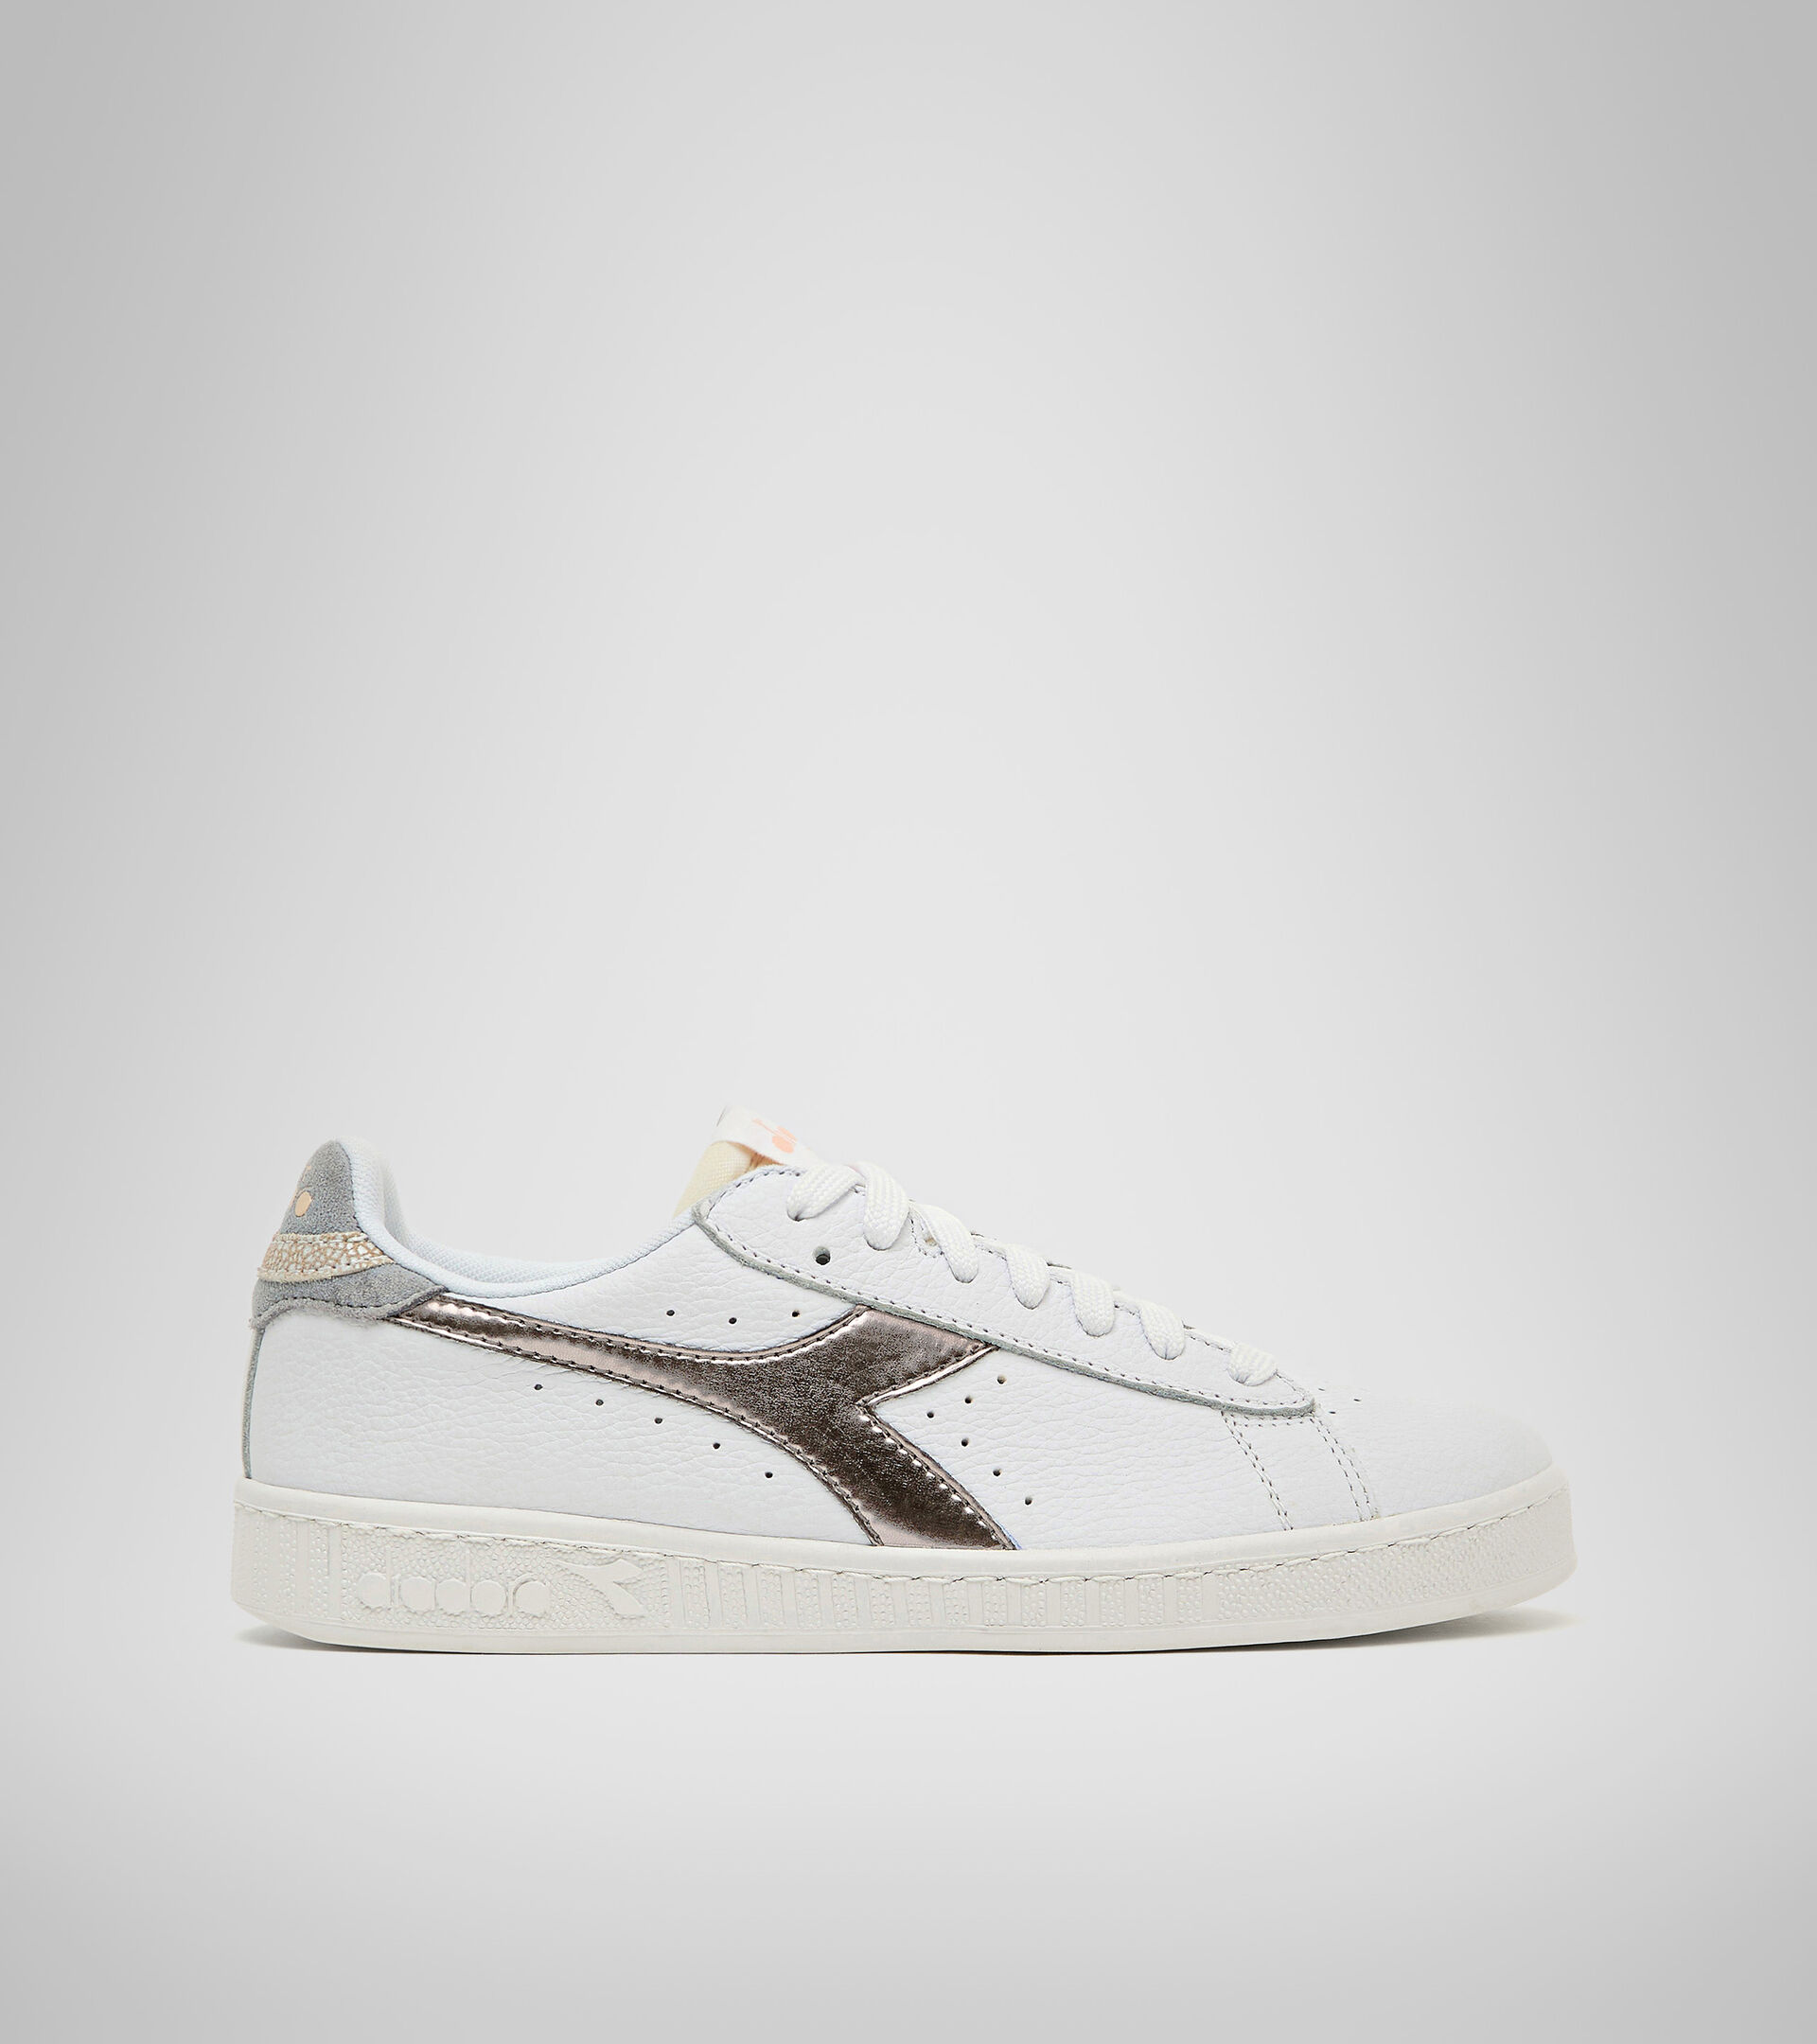 Chaussures de sport - Femme GAME L LOW ICONA GLOSSY WN BLANC/ARGENT - Diadora